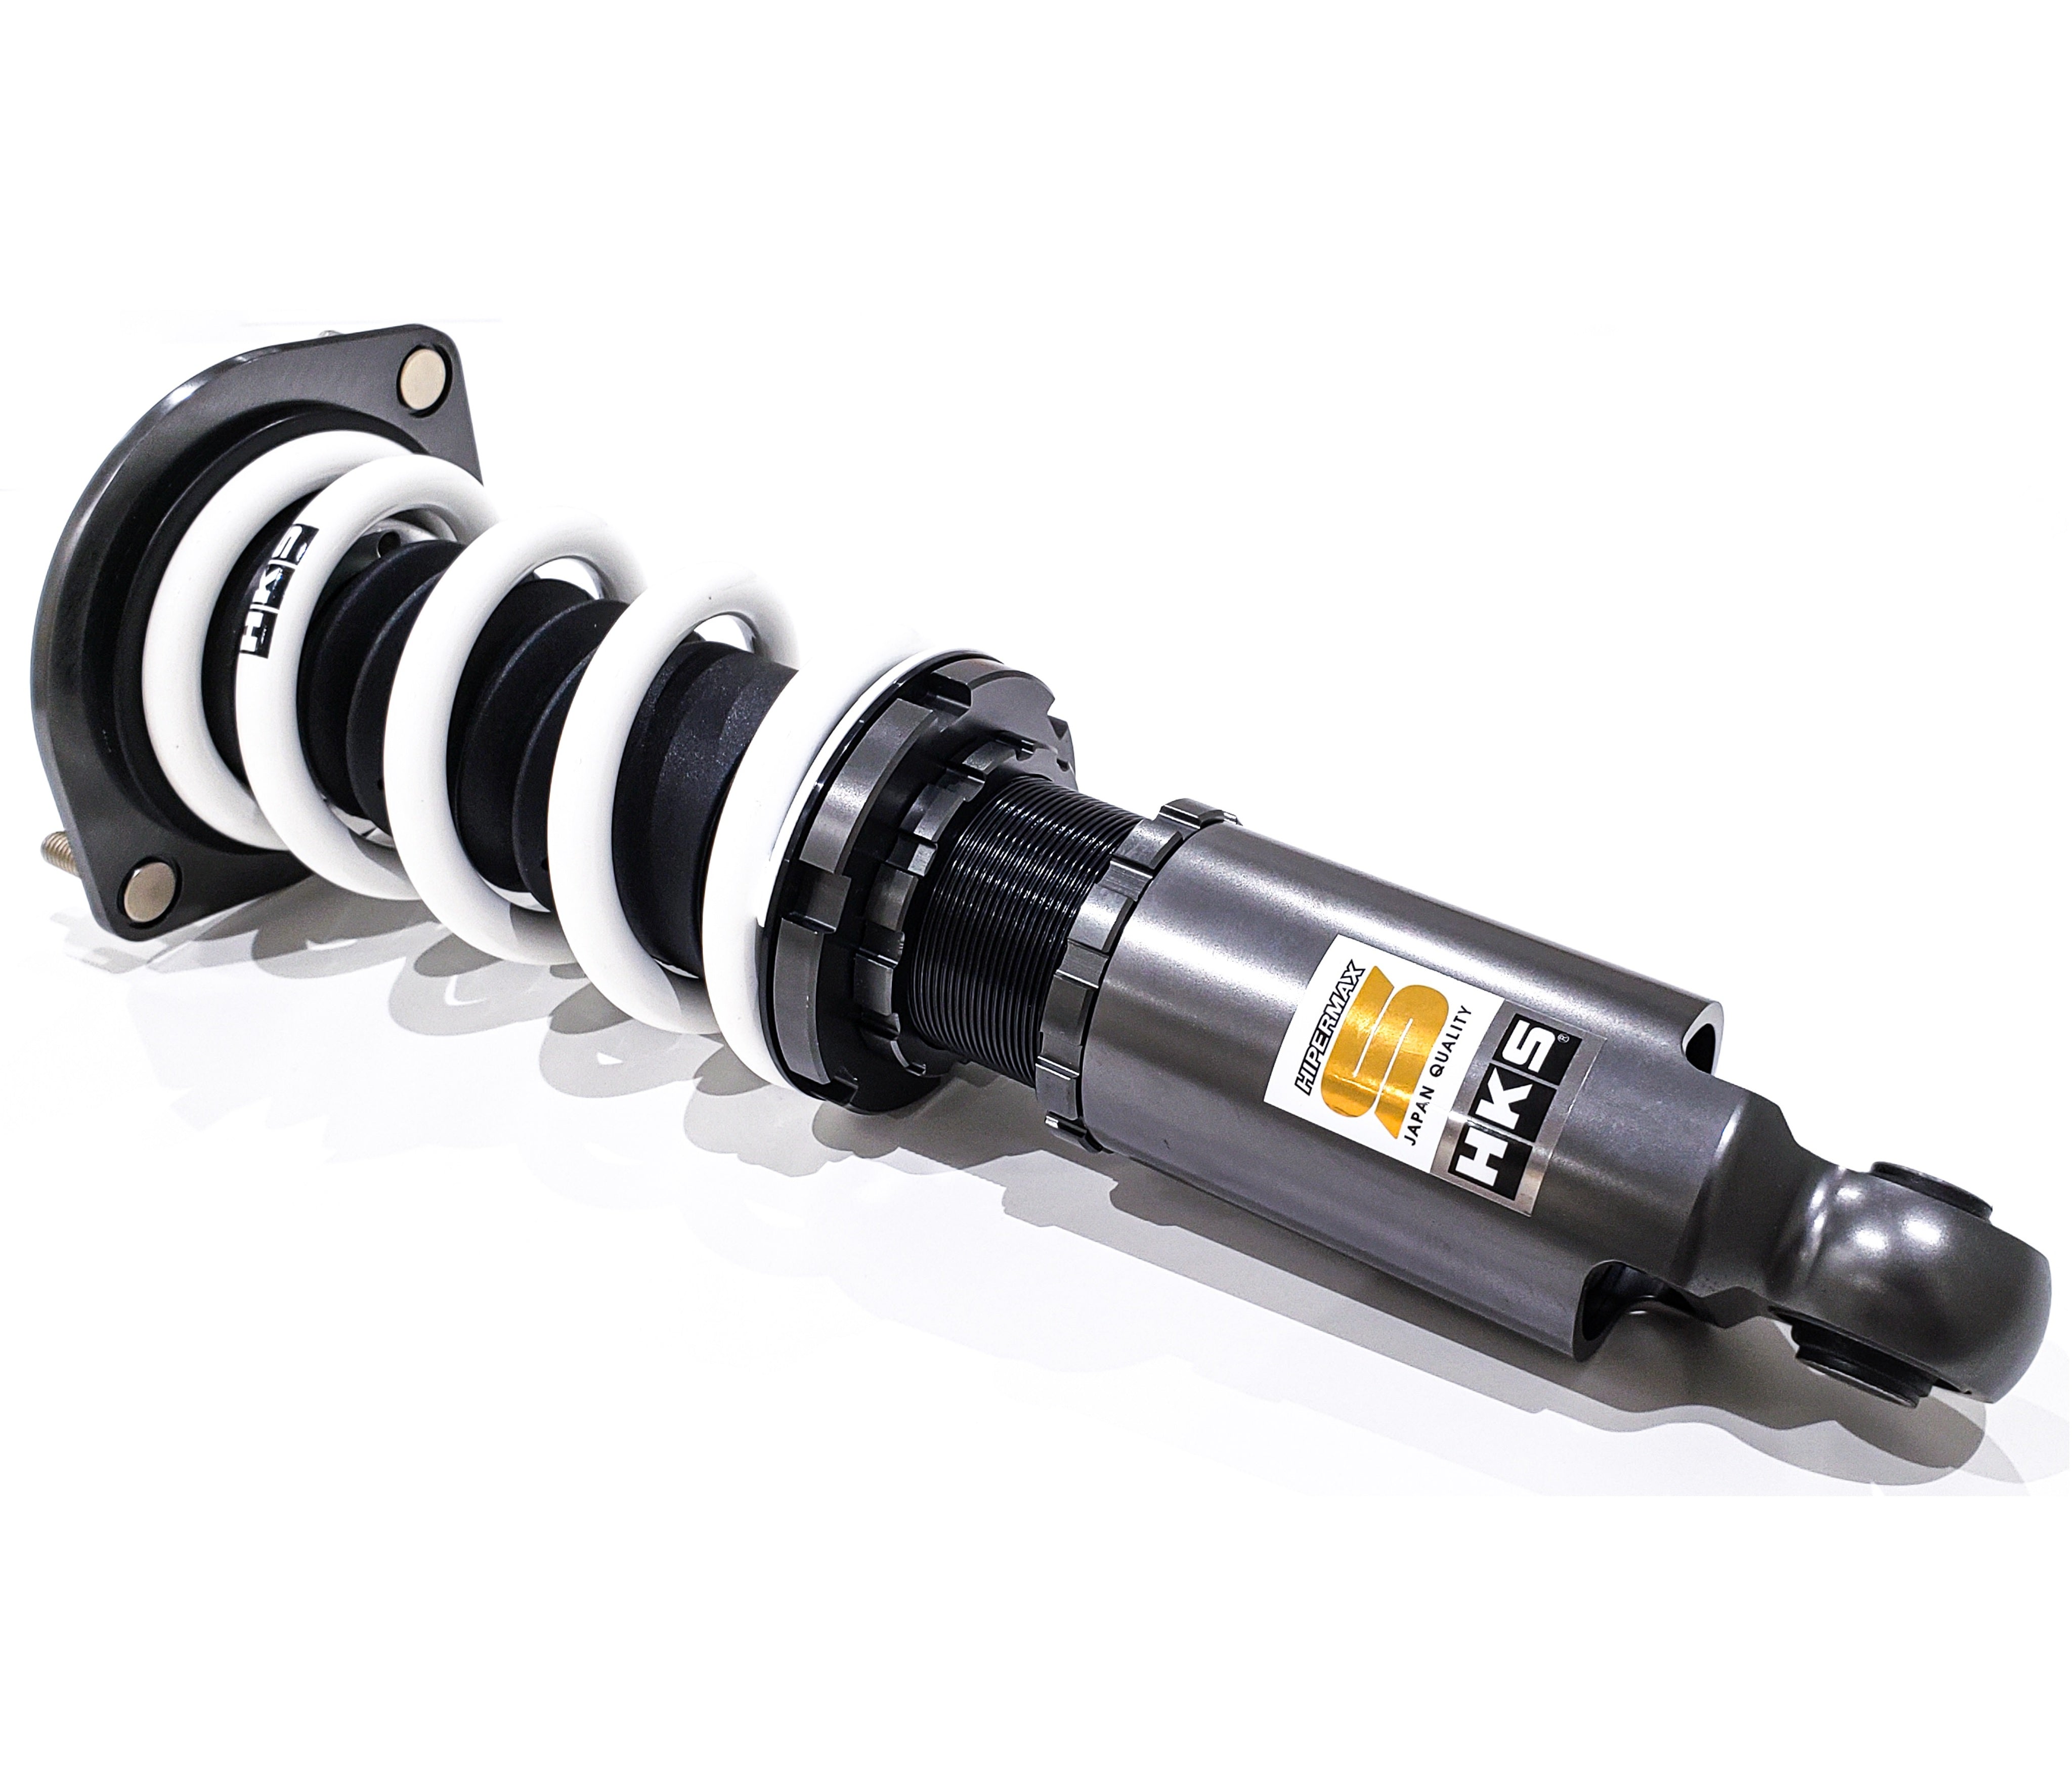 HKS replaces 9 year old coilover technology with New Hipermax S coilover series